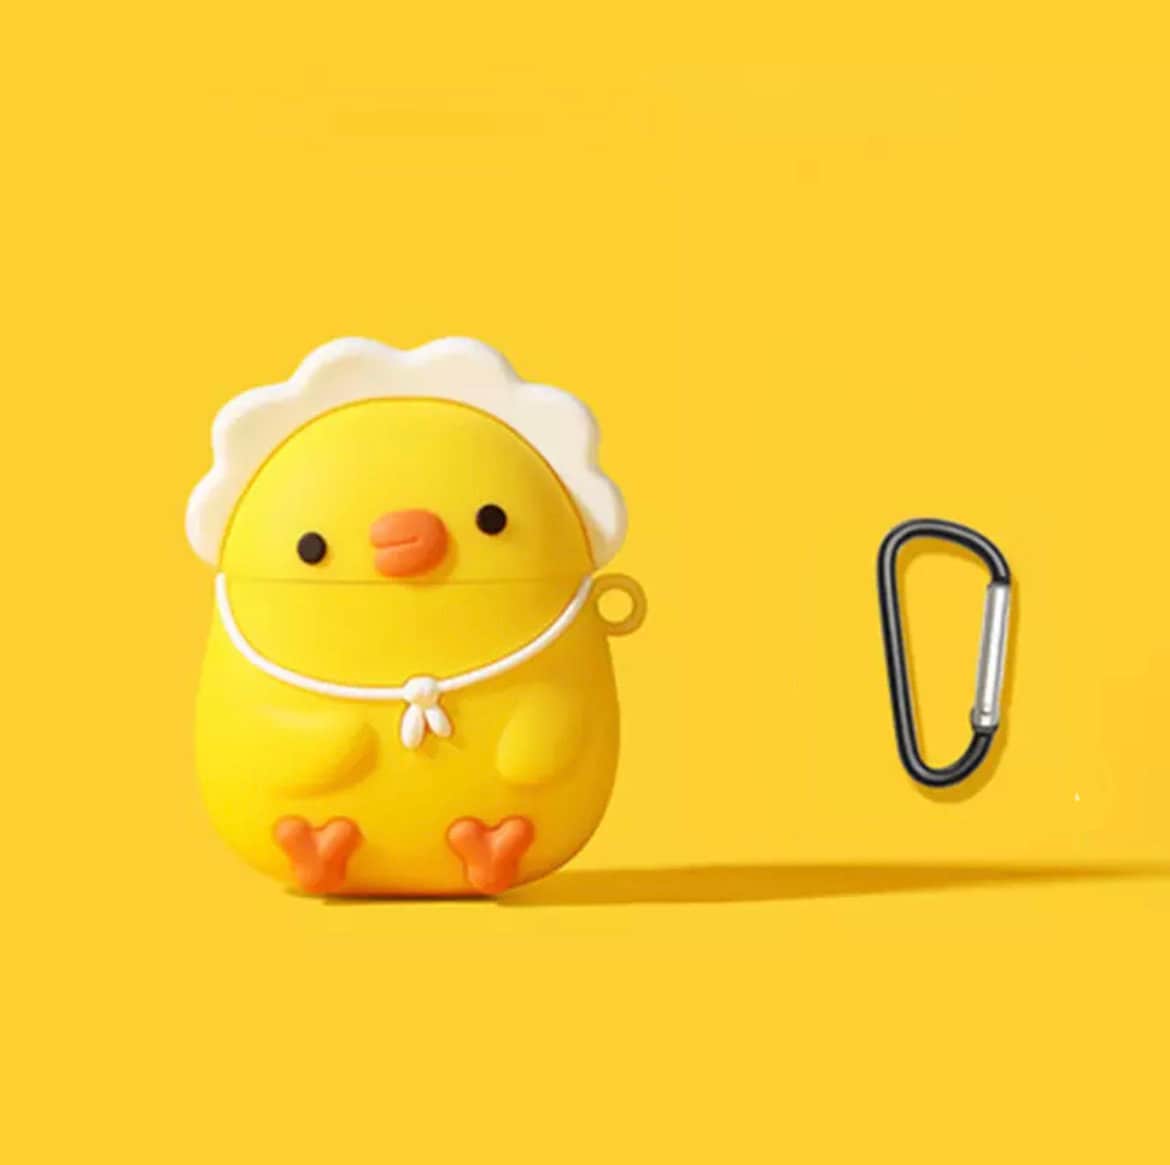 Kawaii Cute Duck Case for AirPods Case for AirPods 1 2 3 Case Cover with Chain&Charm Earphone case for AirPods